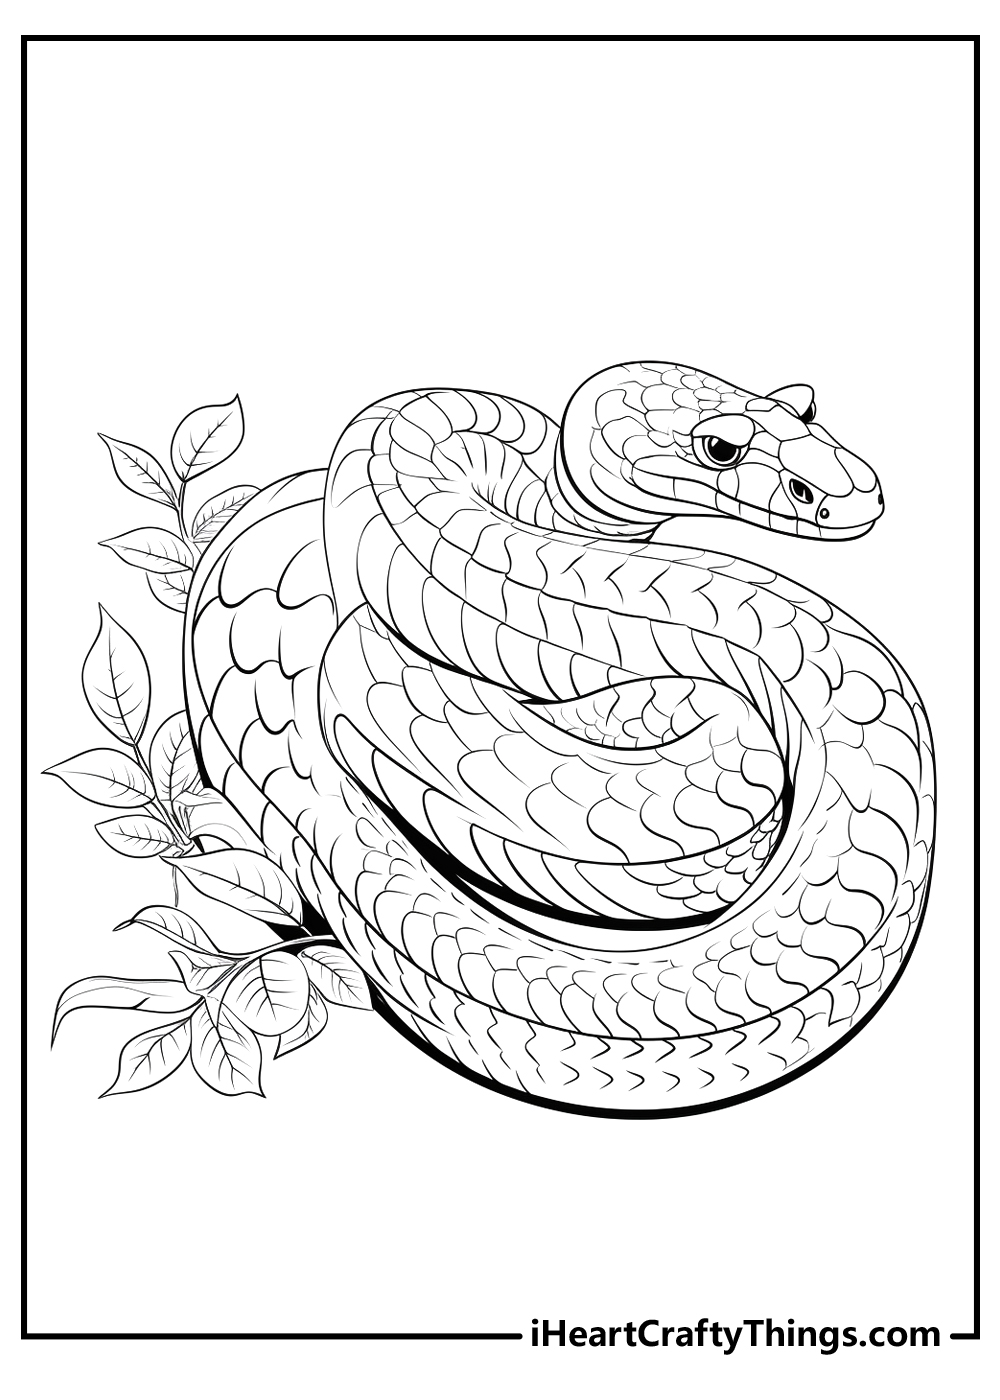 black-and-white snake coloring pages